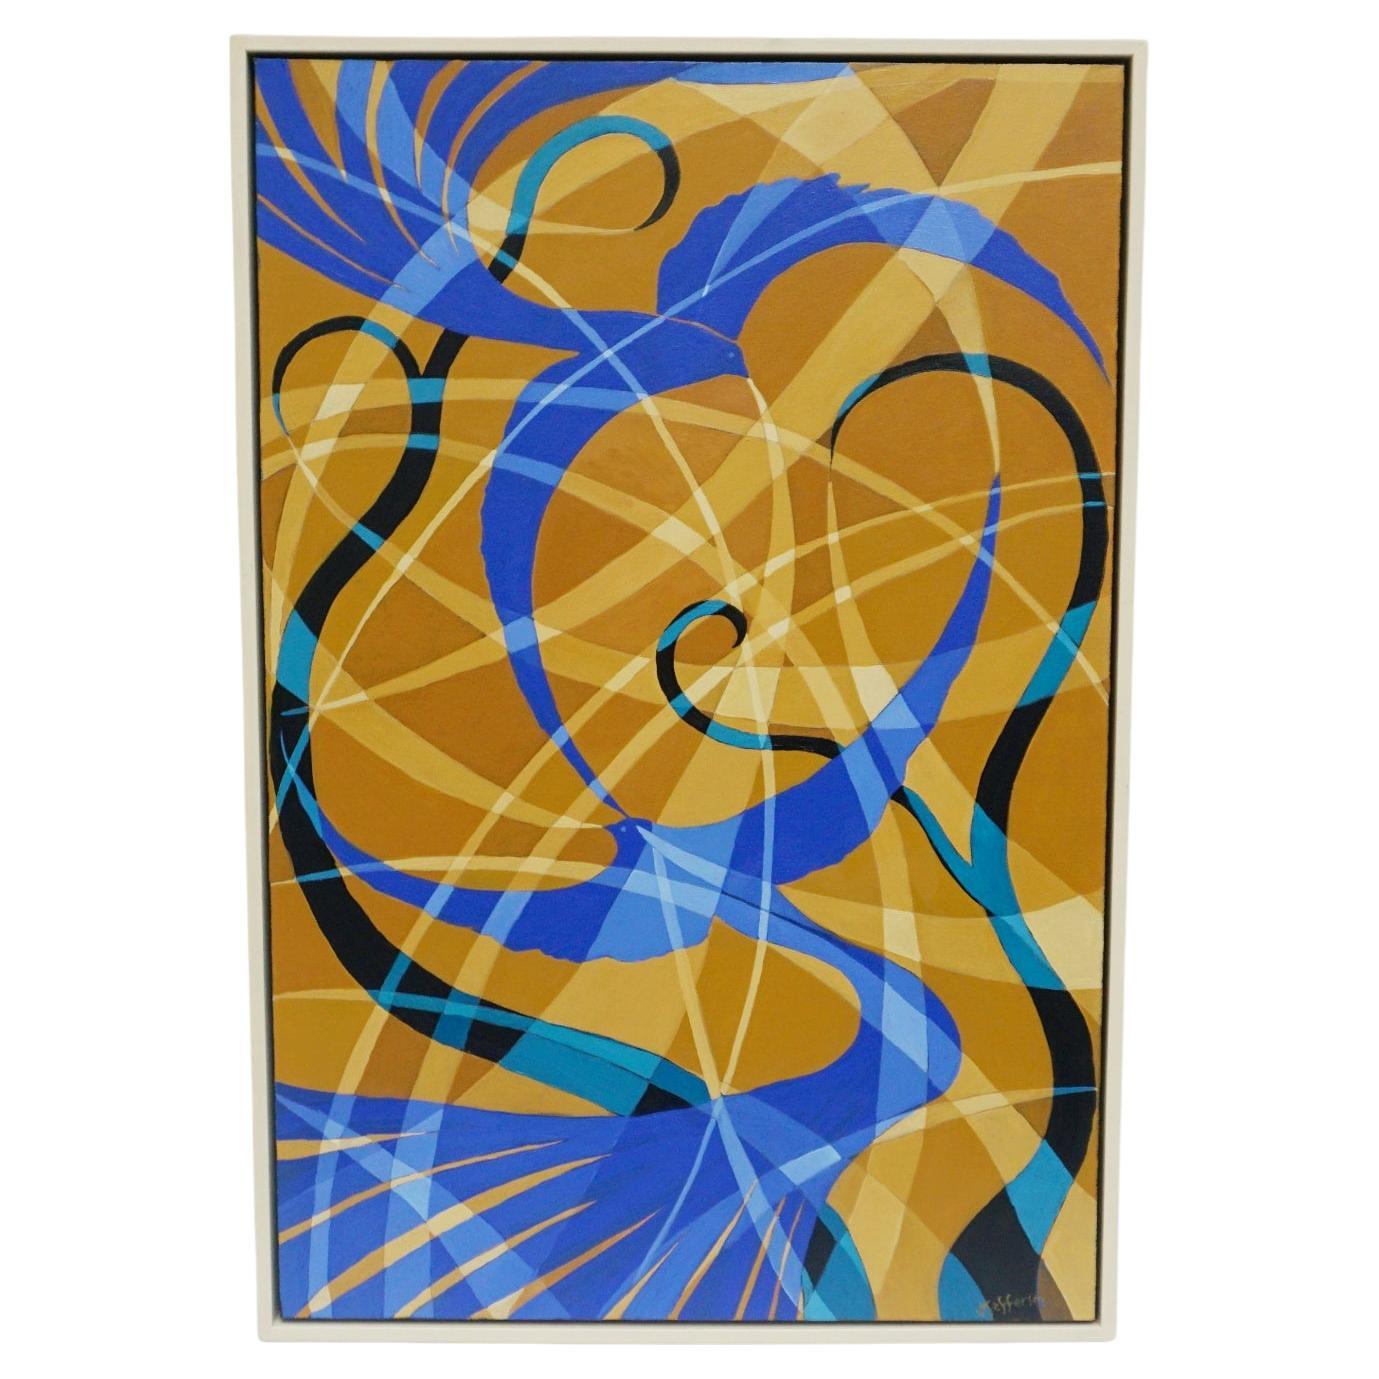 "Blue Love Birds' Abstract Contemporary Oil on Canvas Painting